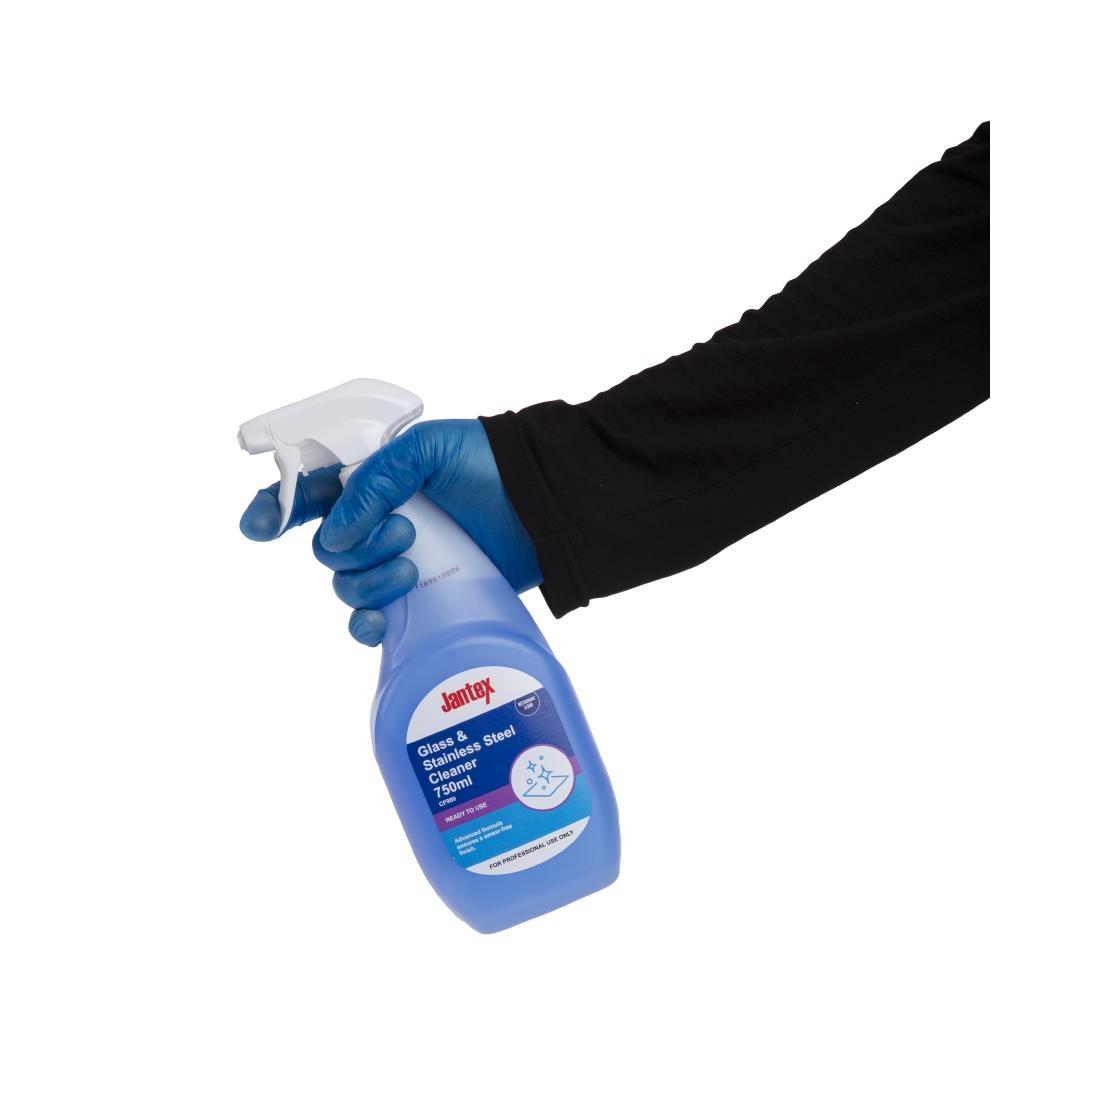 Jantex Glass and Stainless Steel Cleaner Ready To Use 750ml - CF980  - 4